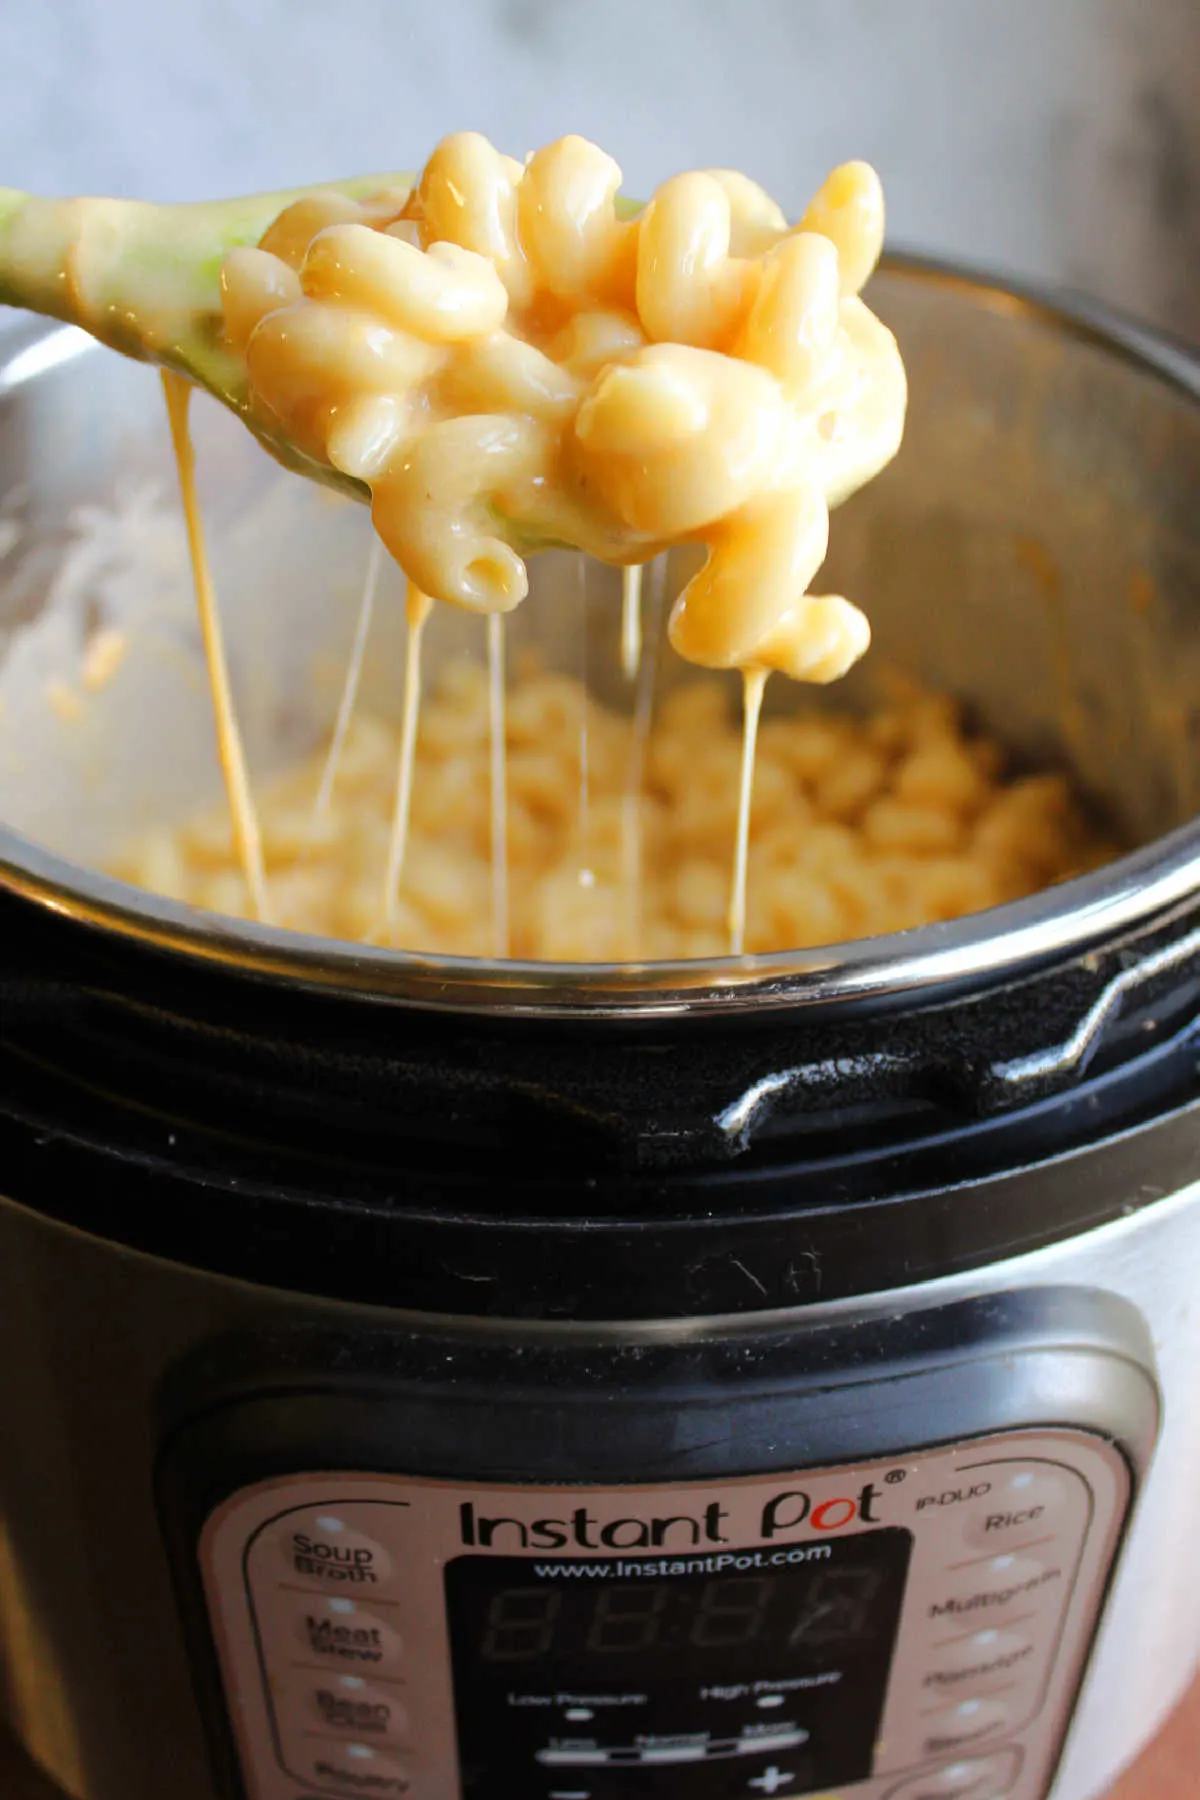 Spoon lifting curly mac and cheese instant pot with several cheese pulls coming from the pot showing rich, cheesy sauce.